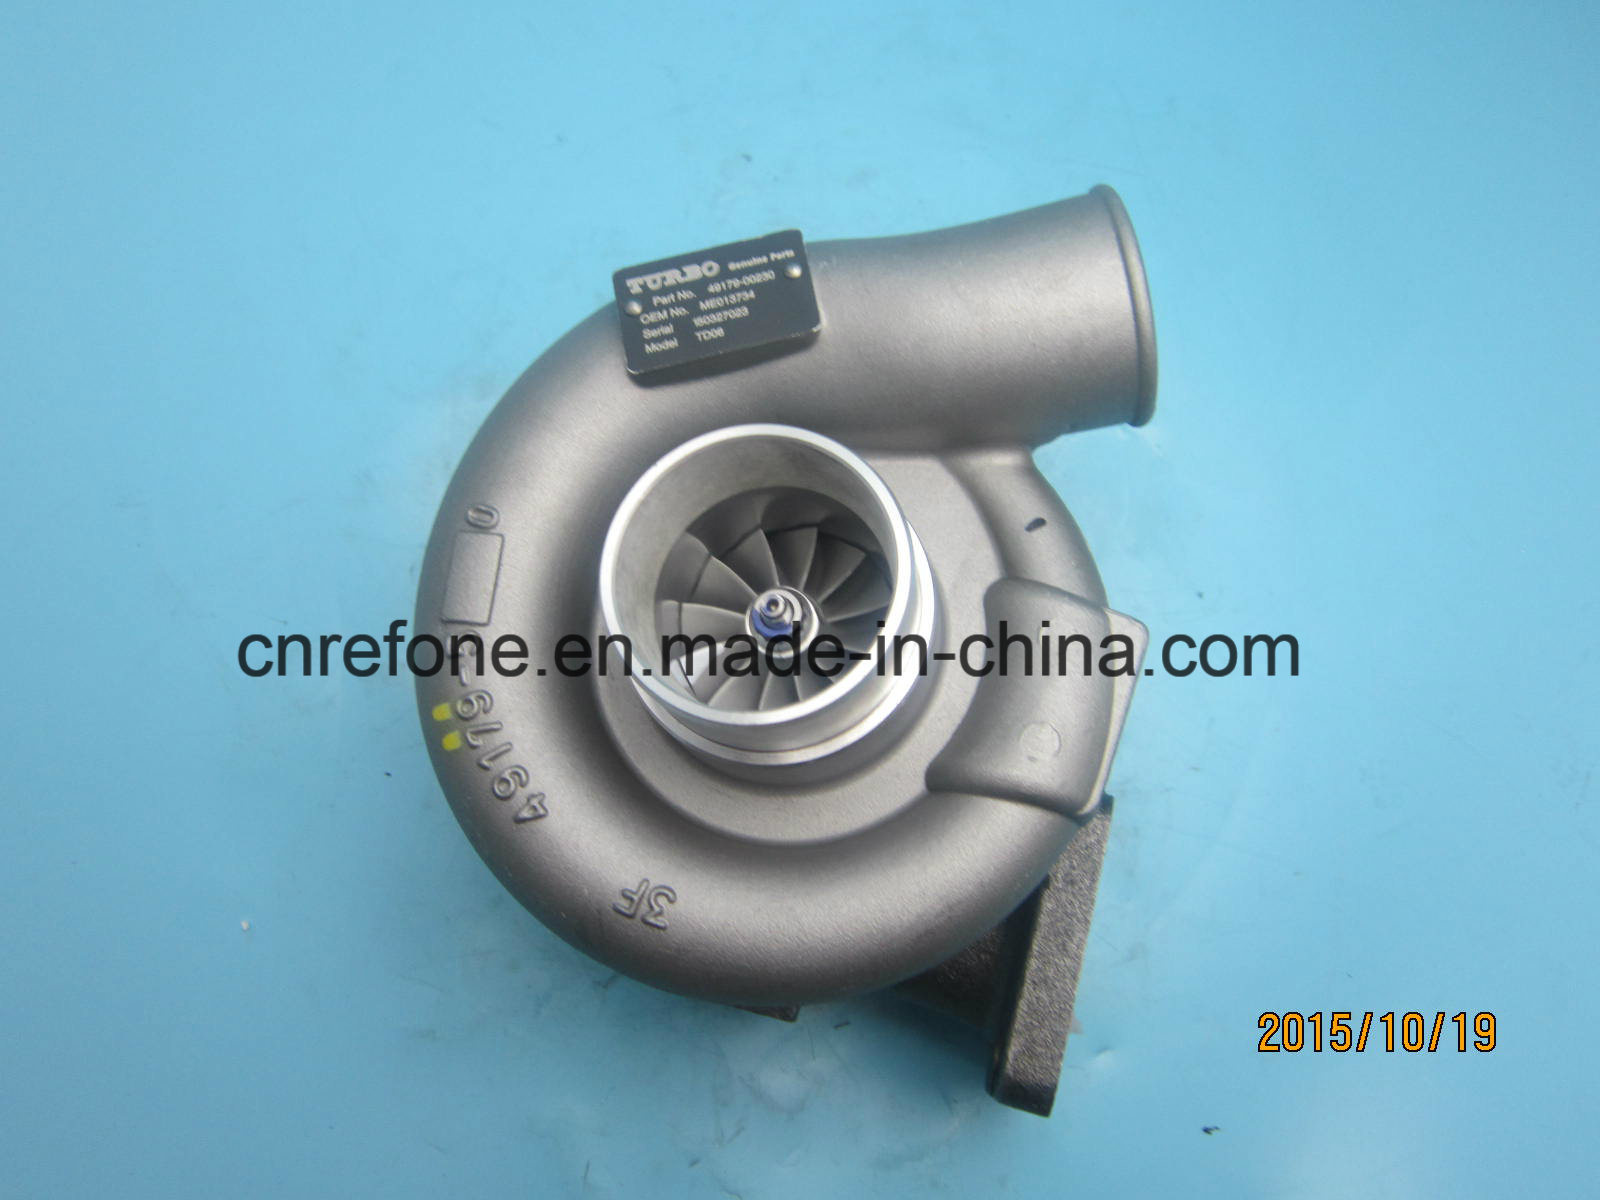 Td06 Tdo6 Turbocharger 49179-00230 for Mitsubishi Fuso Truck and Bus Me013734 Turbo for Canter Truck with 4D31t Engine